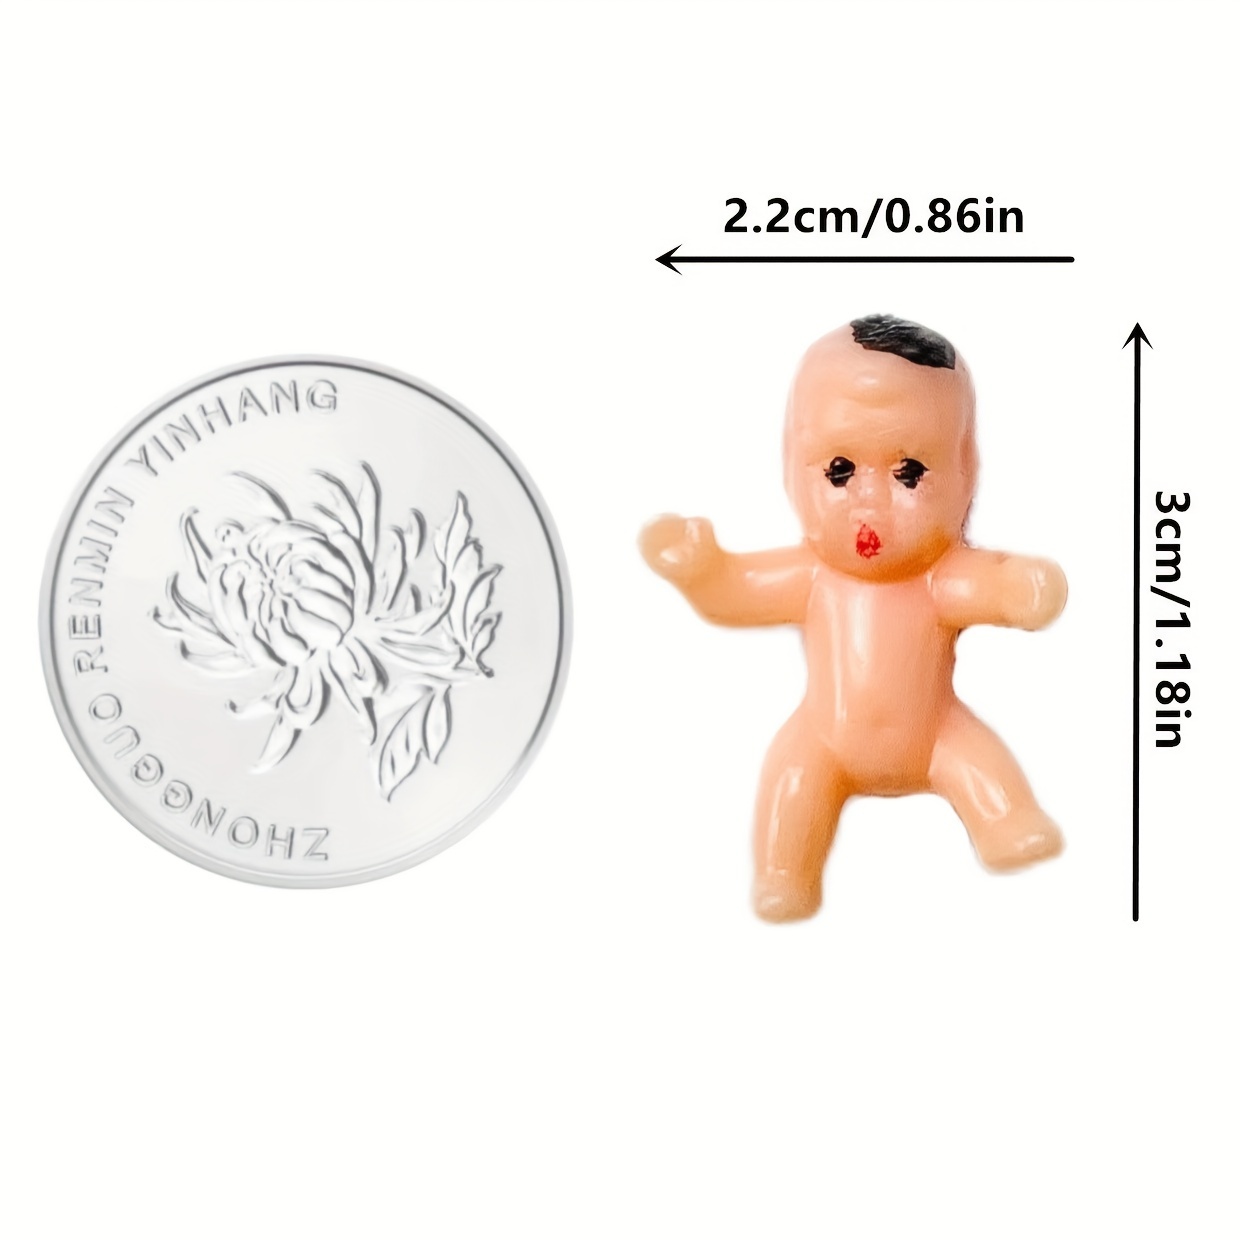  PHILISENMALL Reborn Baby Dolls Tiny Baby Figurines Small King  Cake Babies Little Resin Babies Room Ornaments Decorations for Baby Shower  Party Favors: Home & Kitchen